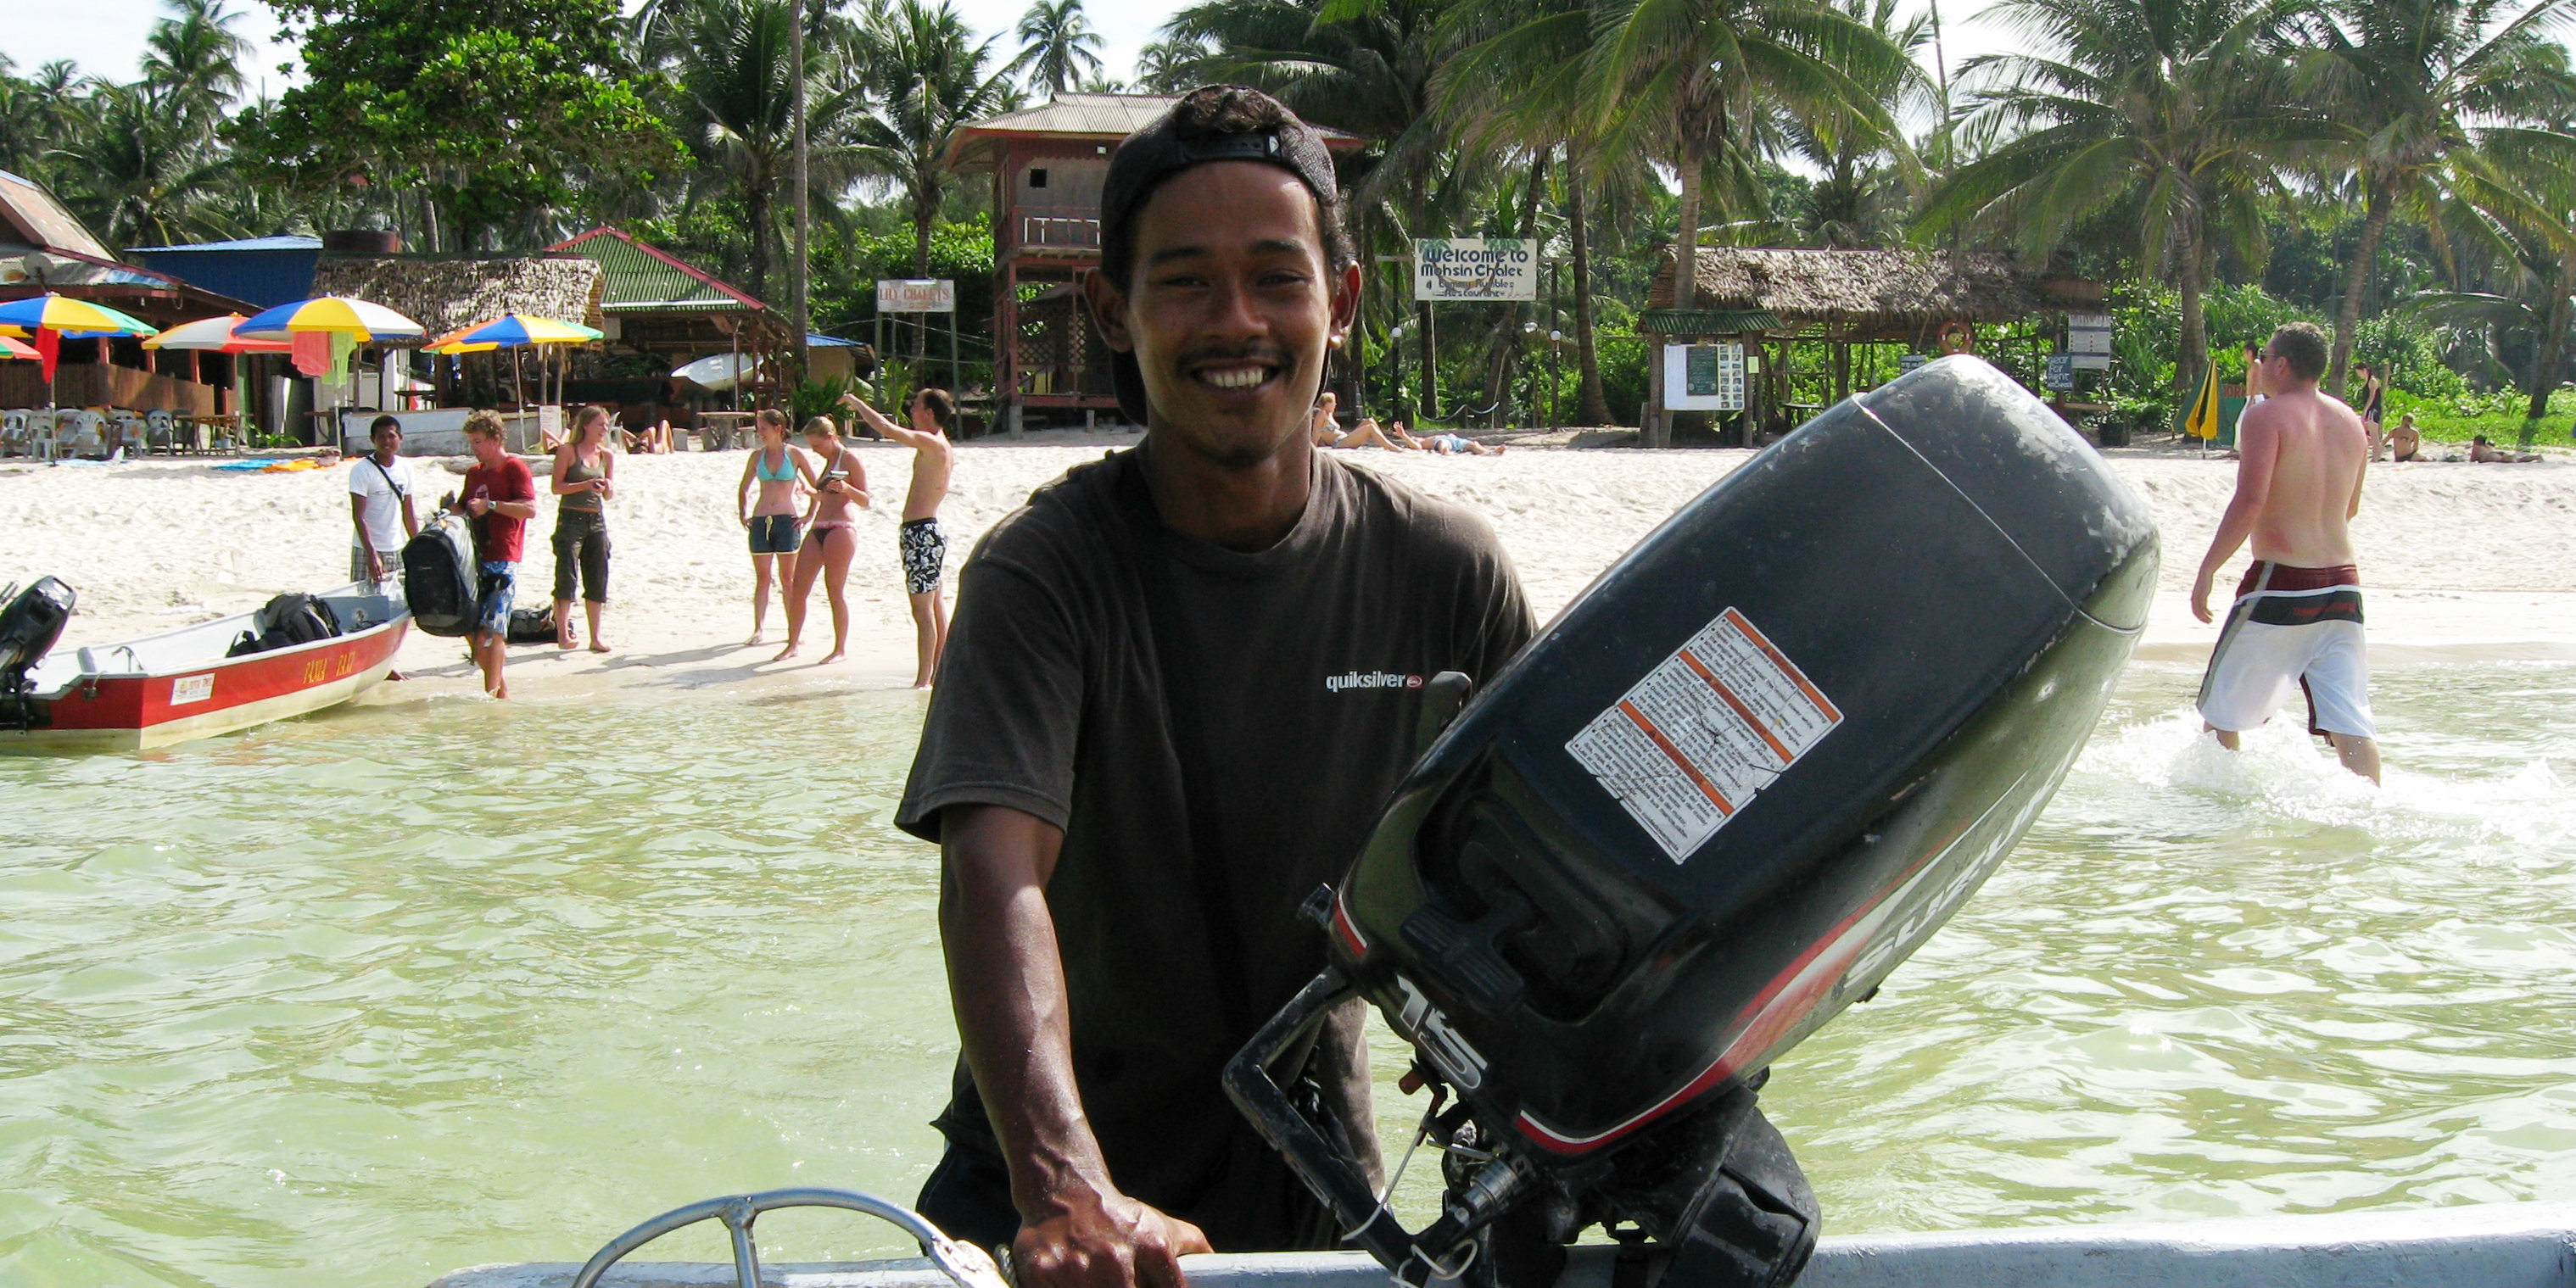 A man helps bring a scuba diving boat back in after one of its scuba diving adventrues.